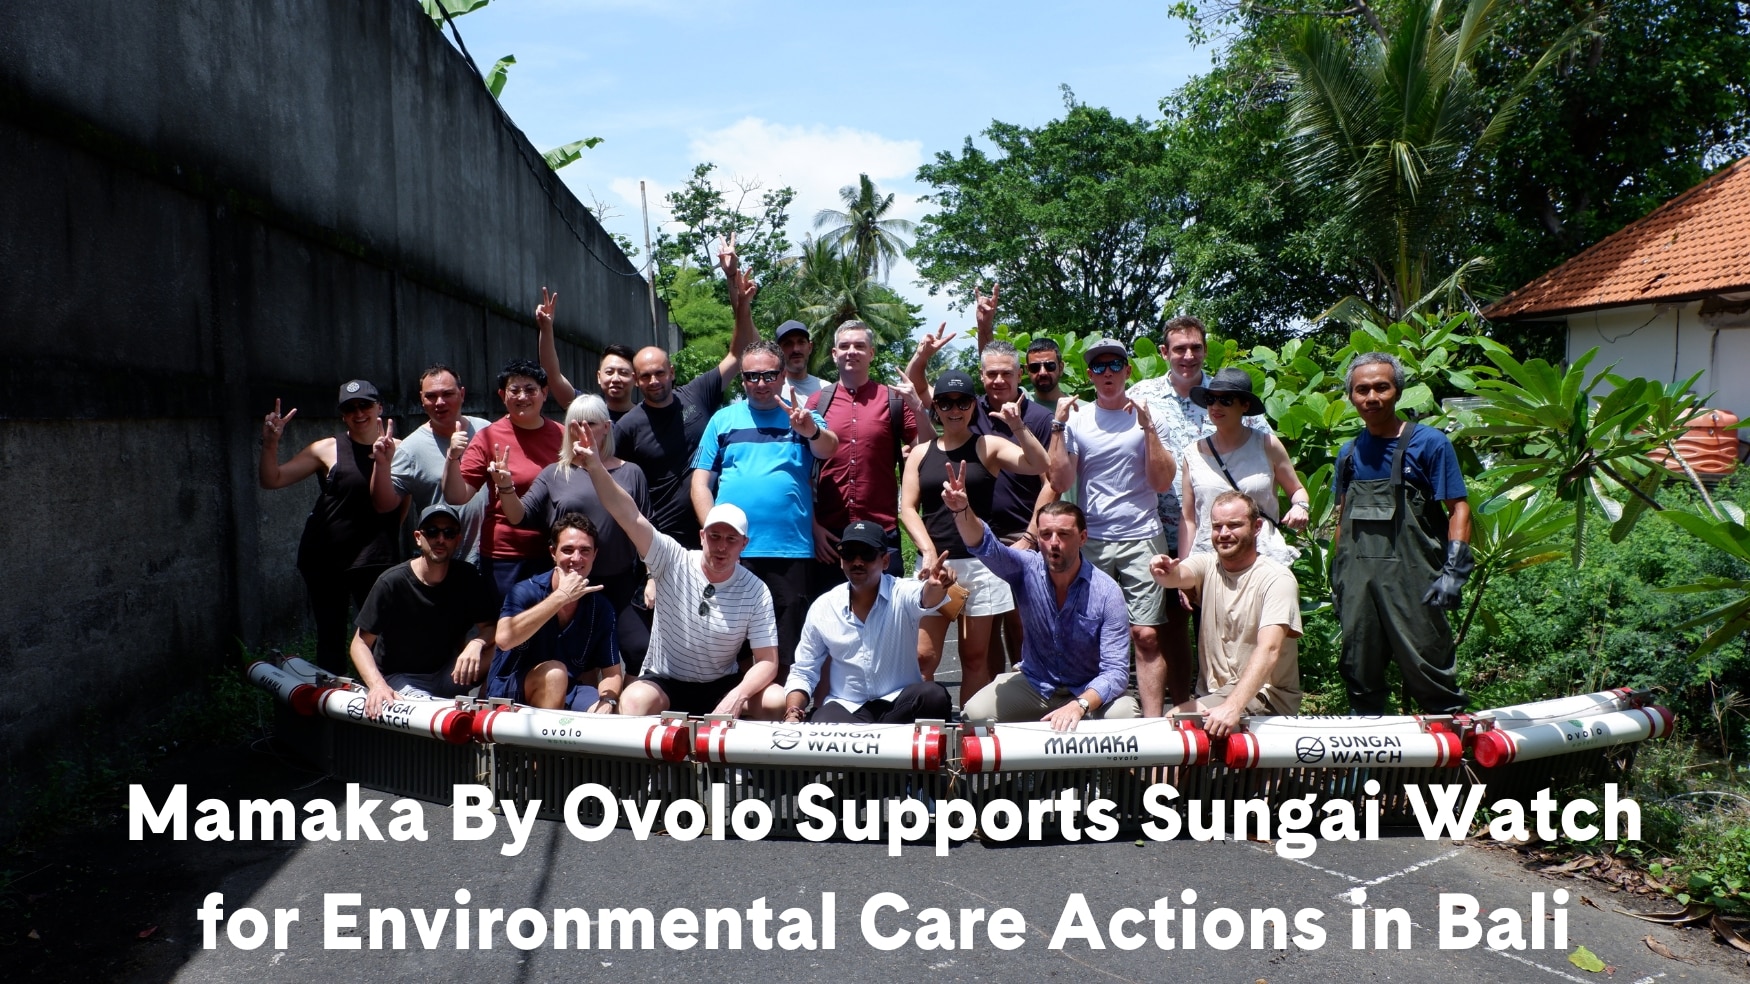 Mamaka By Ovolo Supports Sungai Watch for Environmental Care Actions in Bali